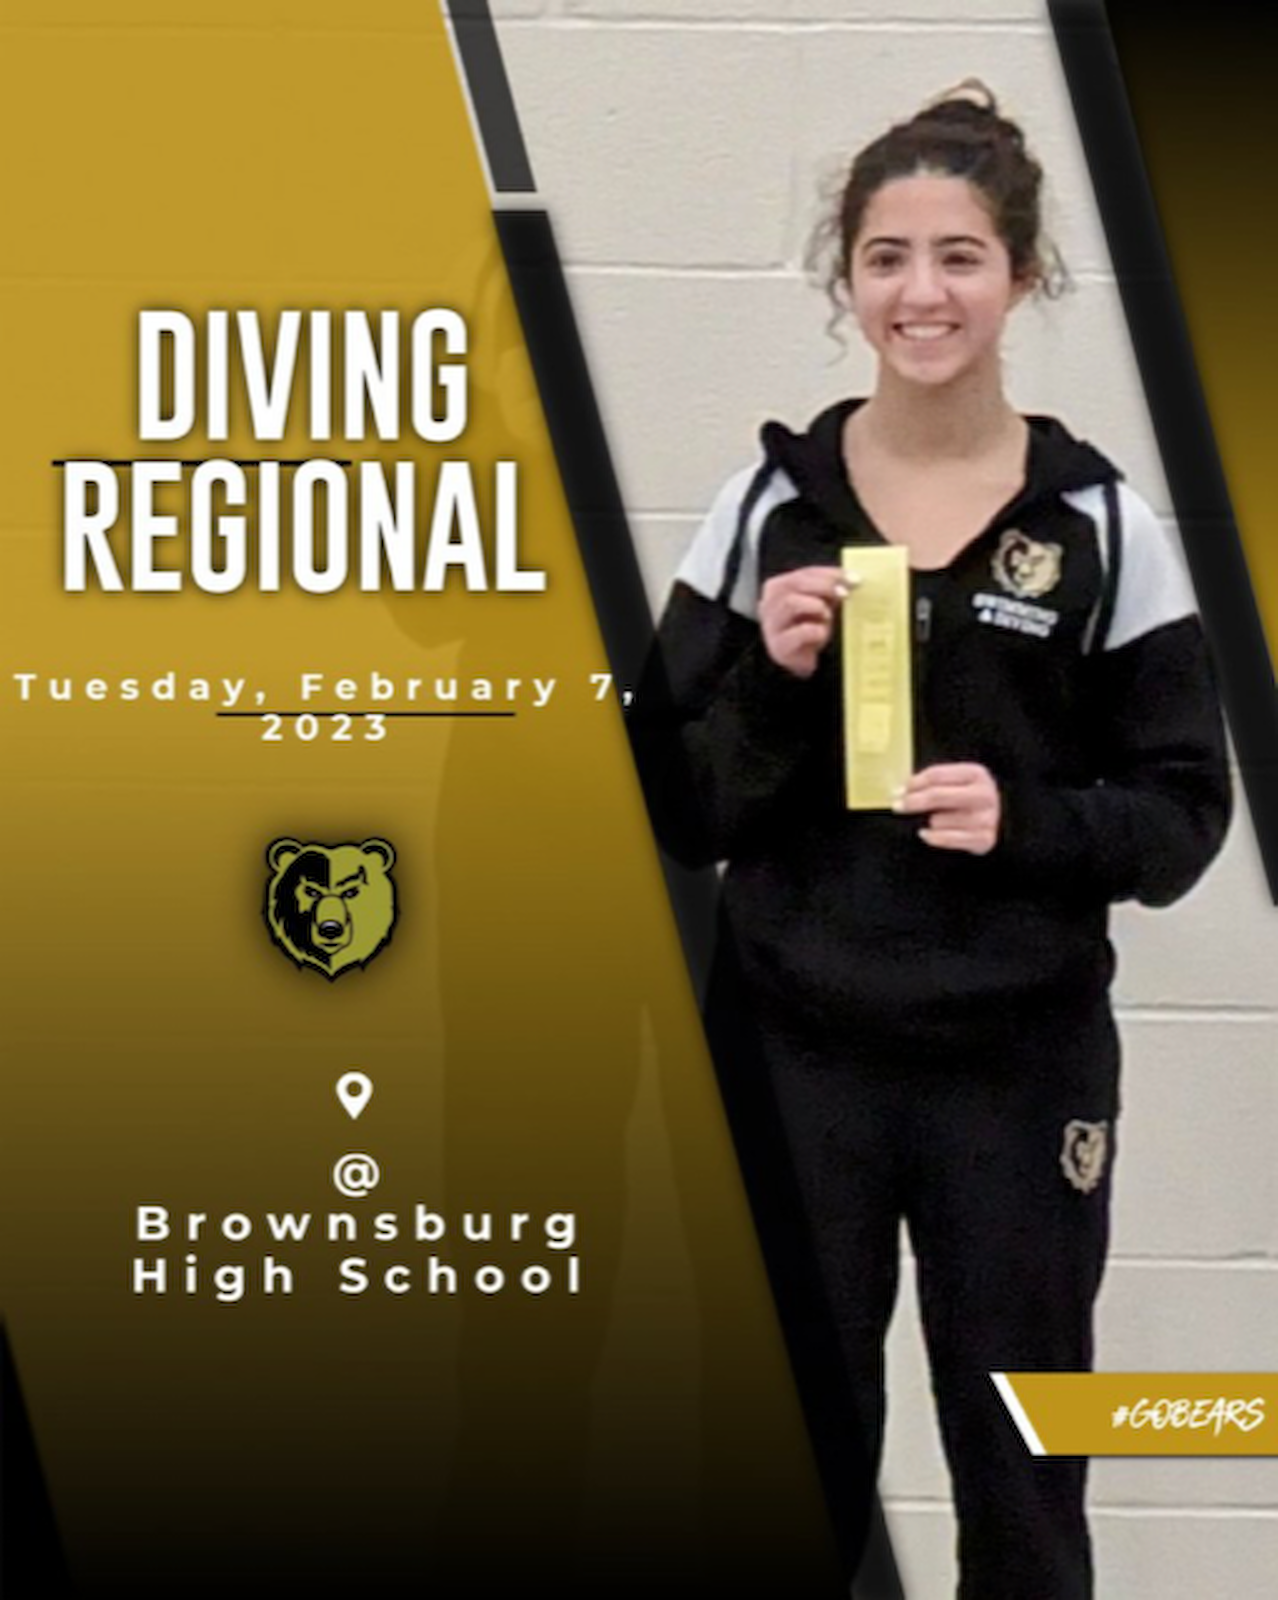 Maiah Helfer-Vazquez finishes 16th at Regional cover photo